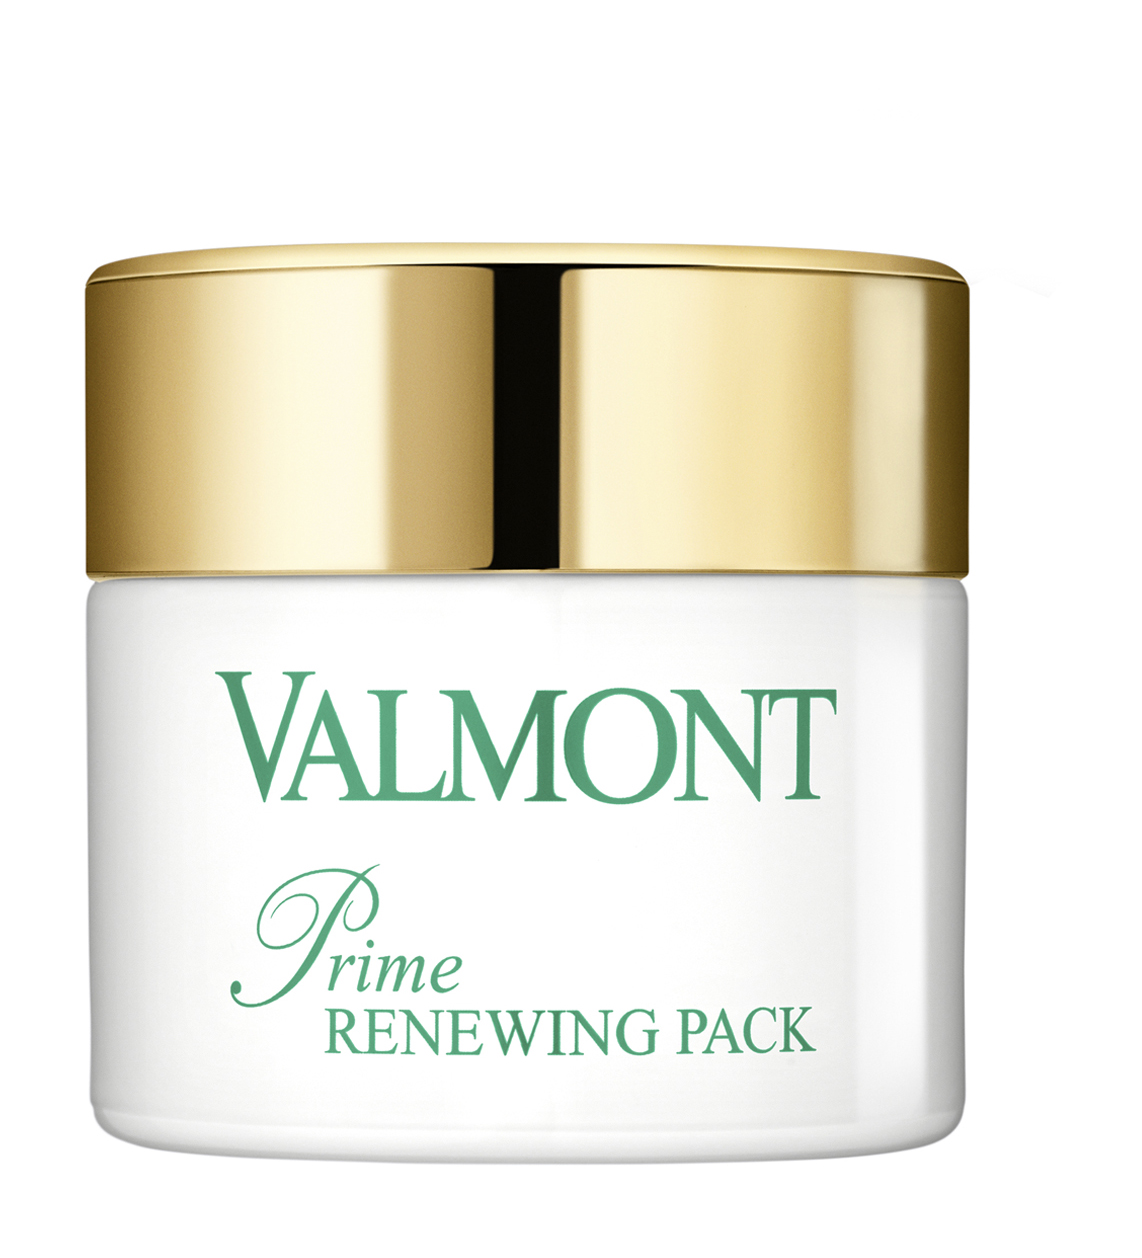 Маска для лица Prime Valmont Renewing Pack Edition Limited Edition, 50 мл